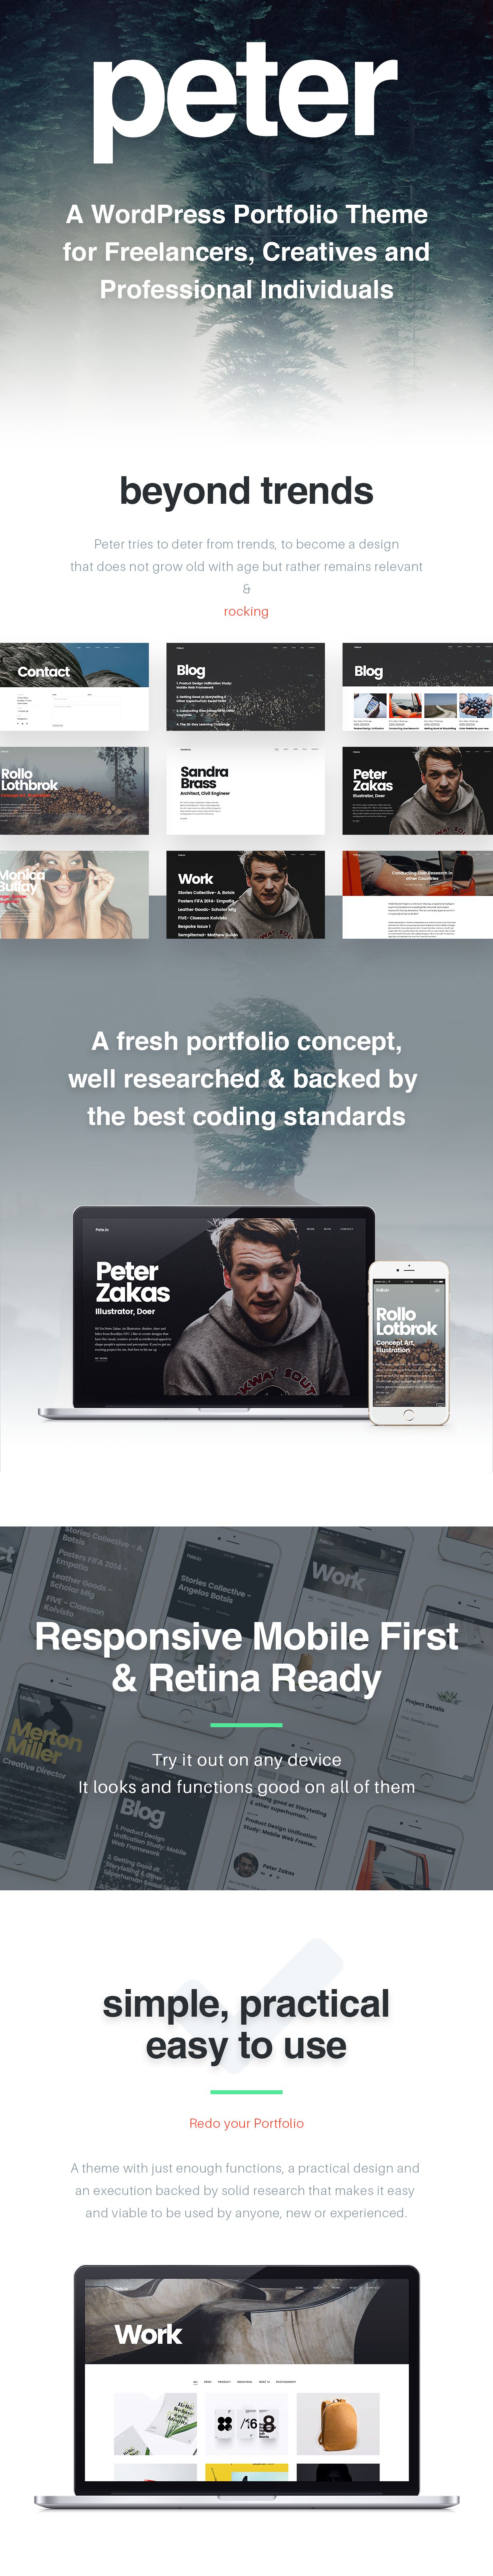 Peter is a portfolio HTML5 website template for creatives, freelancers & professional individuals. Shunning the traditional vCard style, Peter allows you to represent yourself in a new, modern & more personal way. This helps you connect better with the visitor and build a personal touch to create a conversation rather than a monologue. With top of the line design and execution, Peter enjoys a timeless style which makes it function more beyond any trends. Simply put, this design makes sure that your website will never grow old with changing trends.